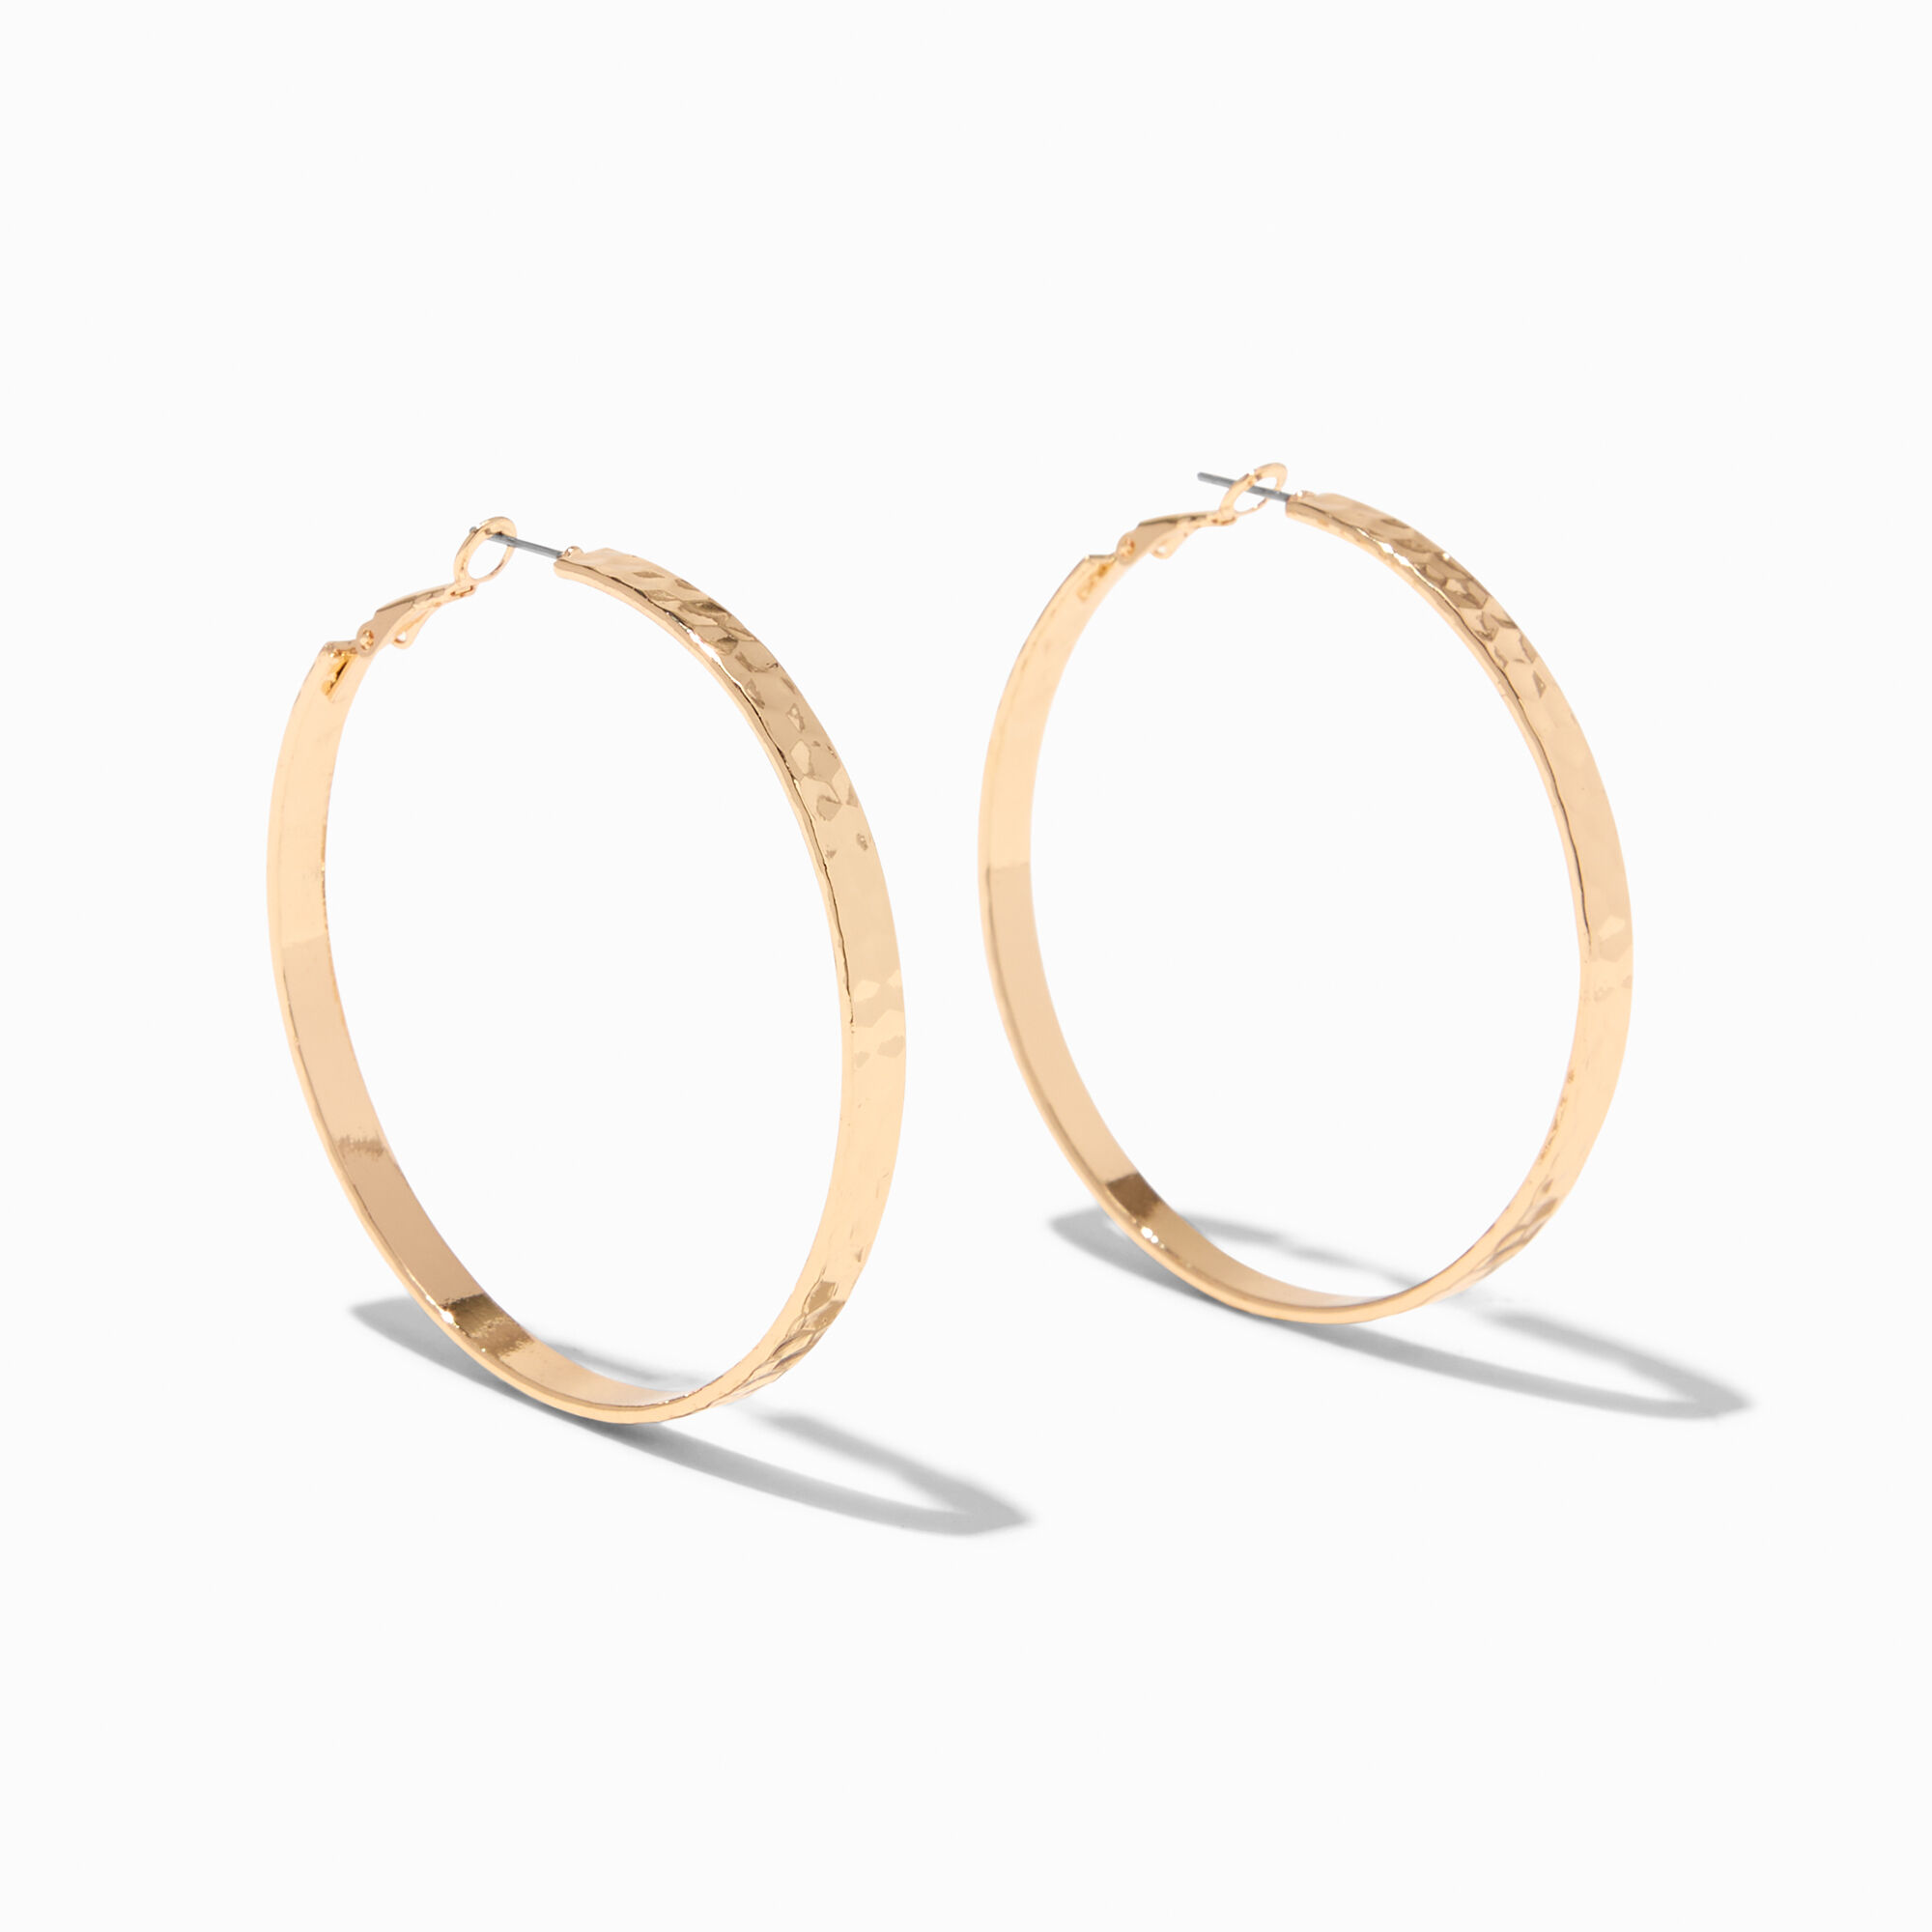 View Claires Tone 60MM Hammered Hoop Earrings Gold information